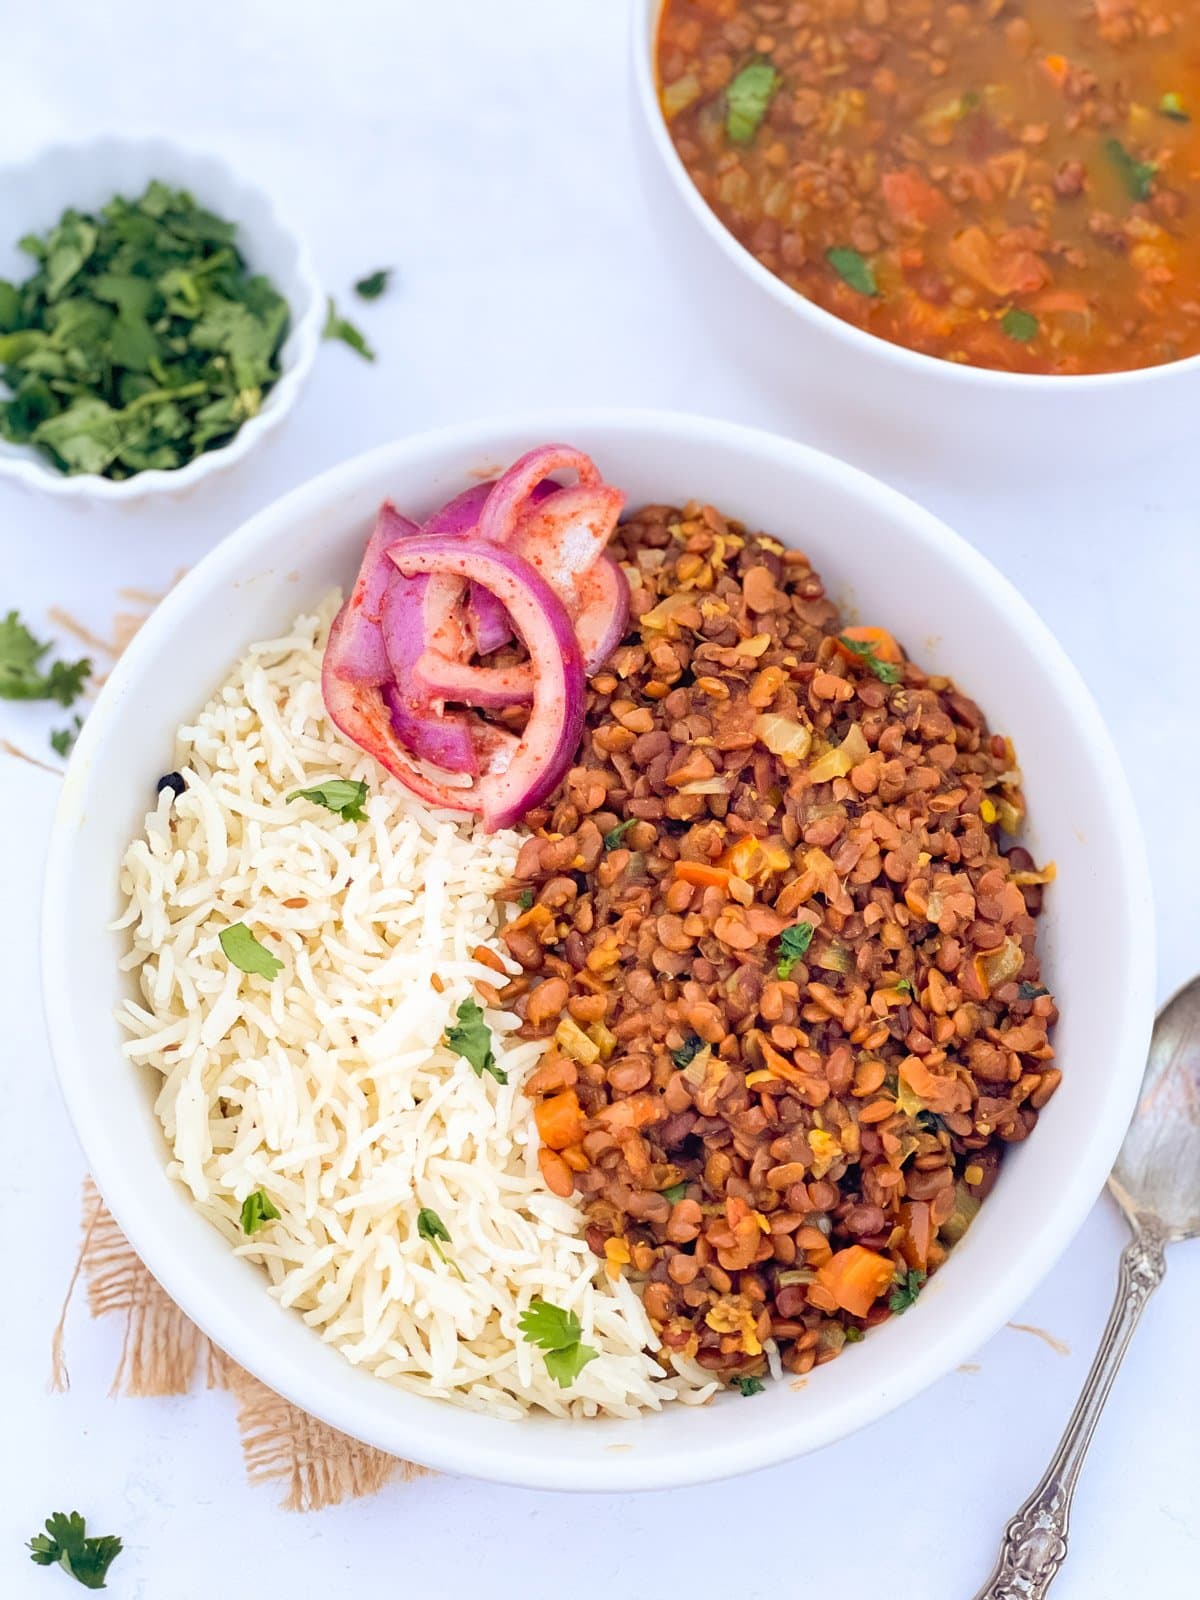 Horsegram dal served with rice in a bowl along with spiced onions 